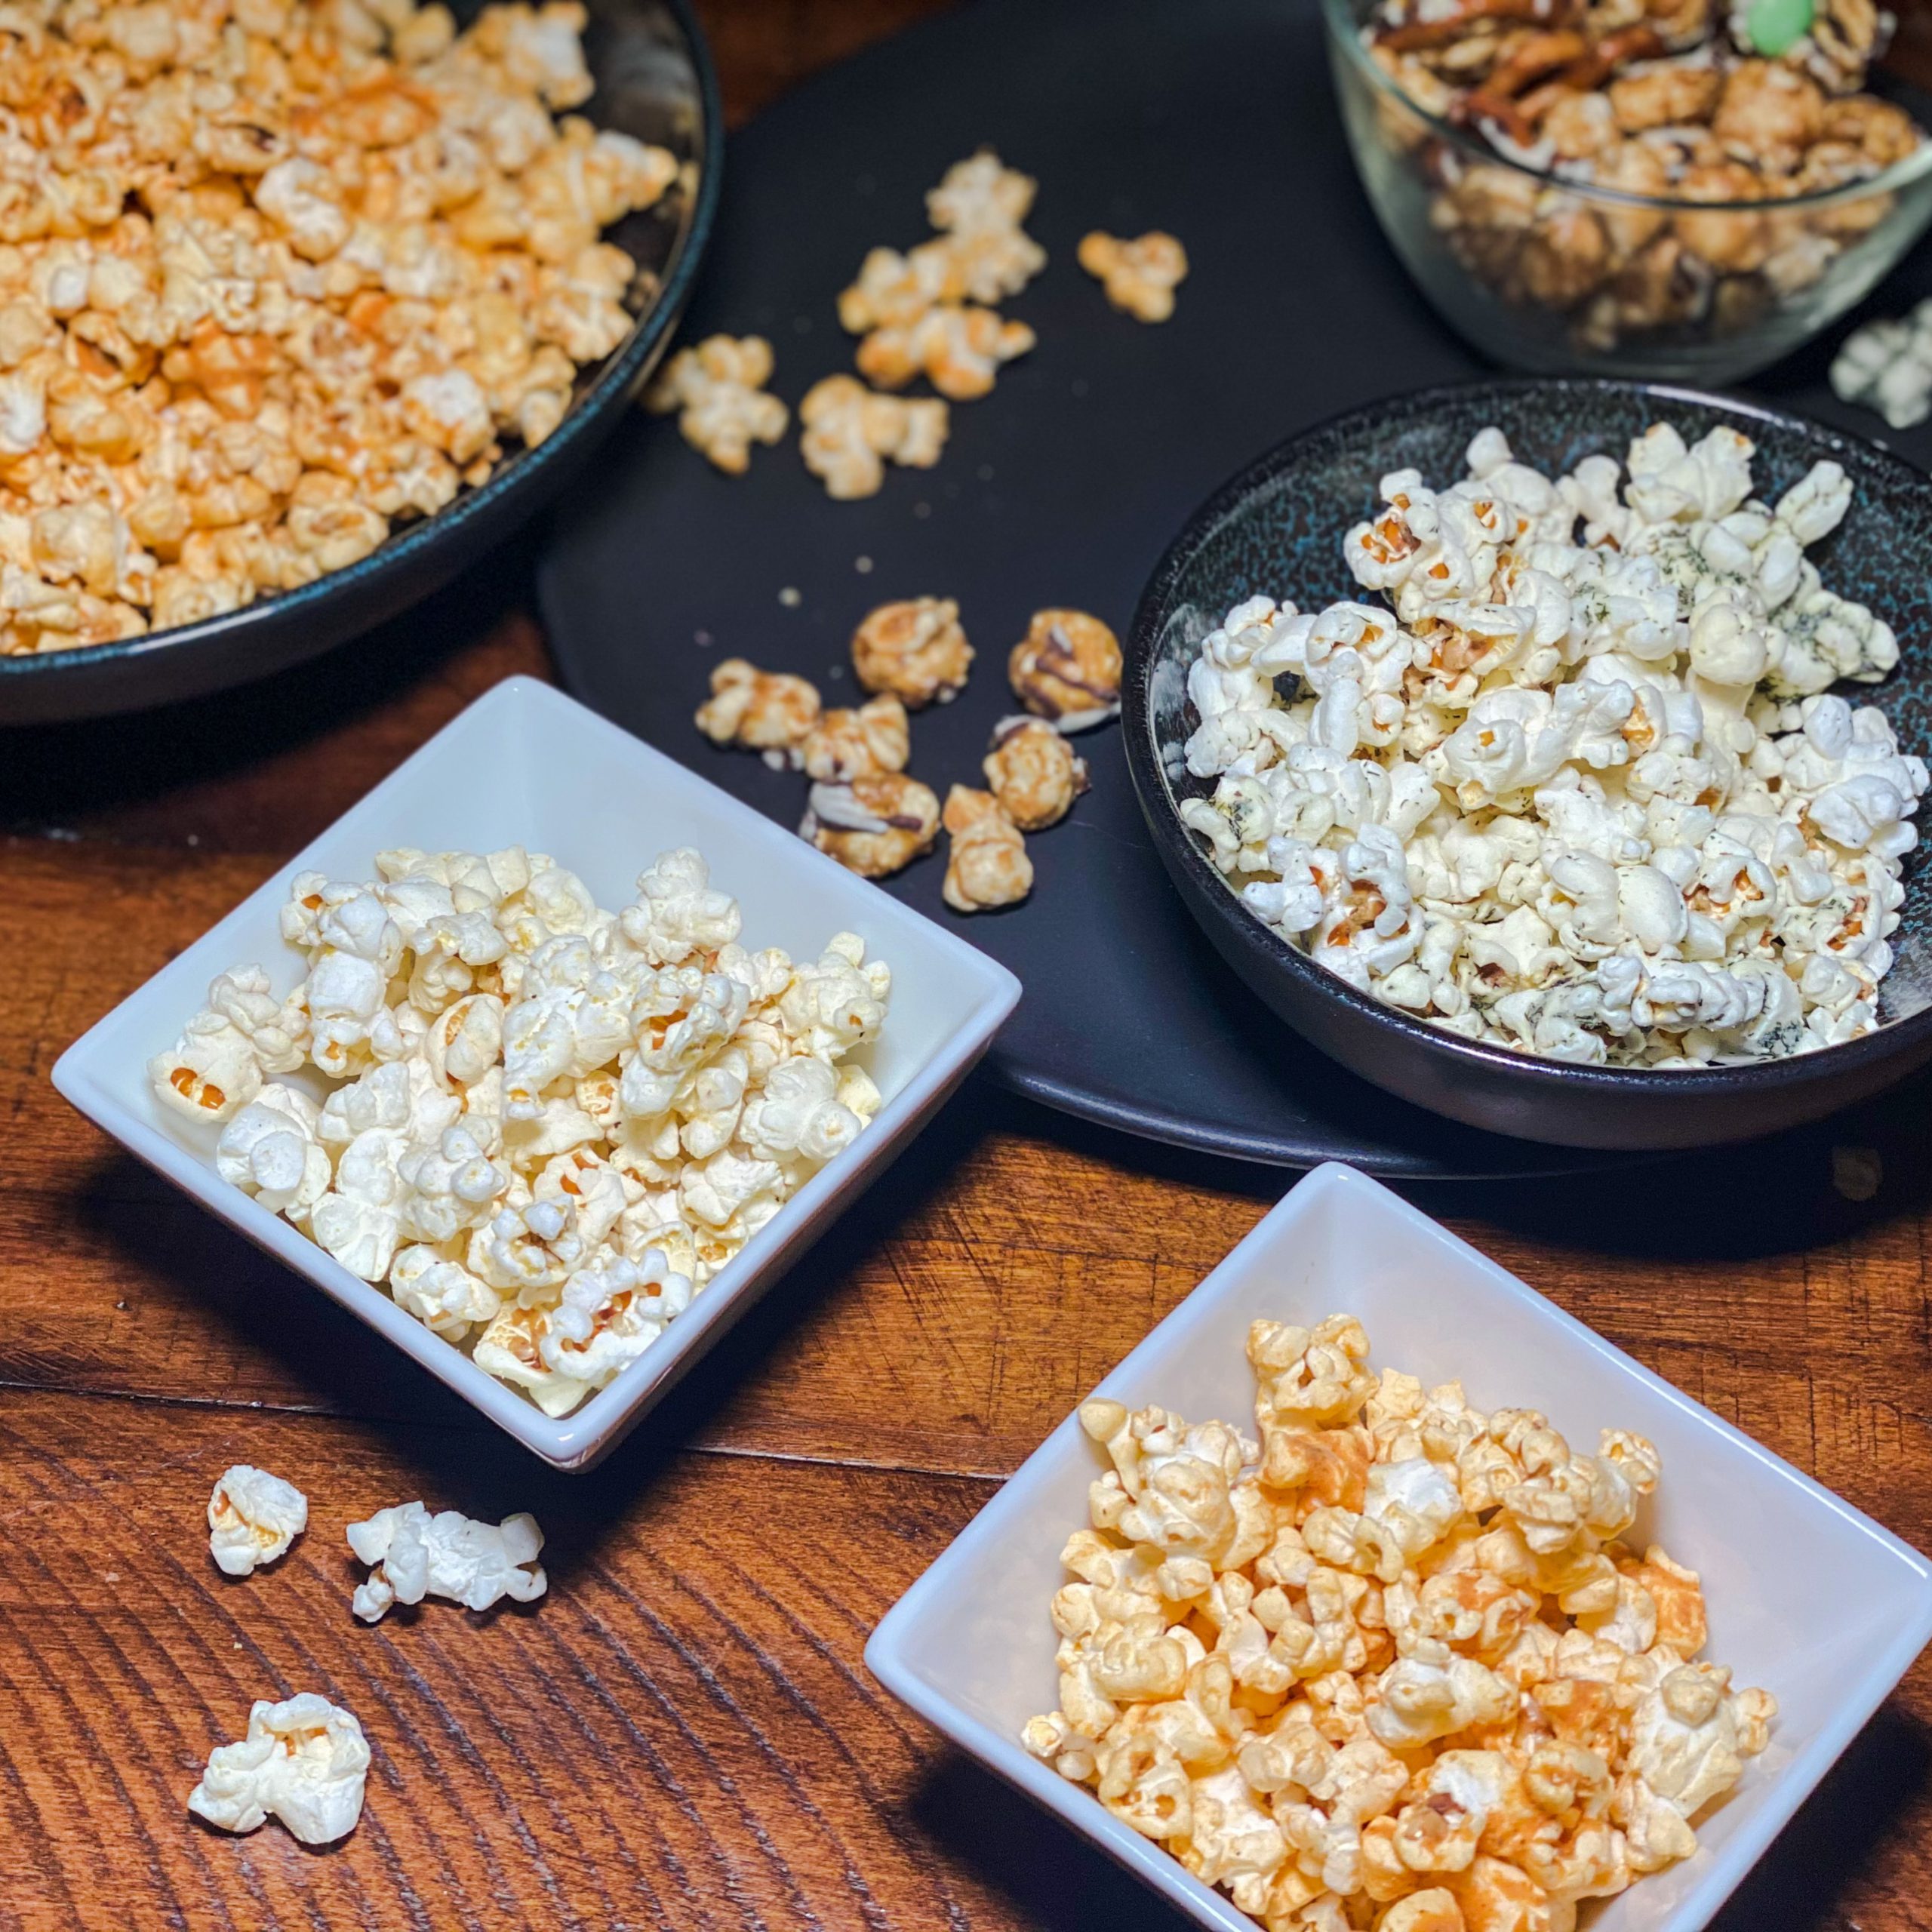 Find Out Which Cocktail Pairs Well With Gourmet Popcorn